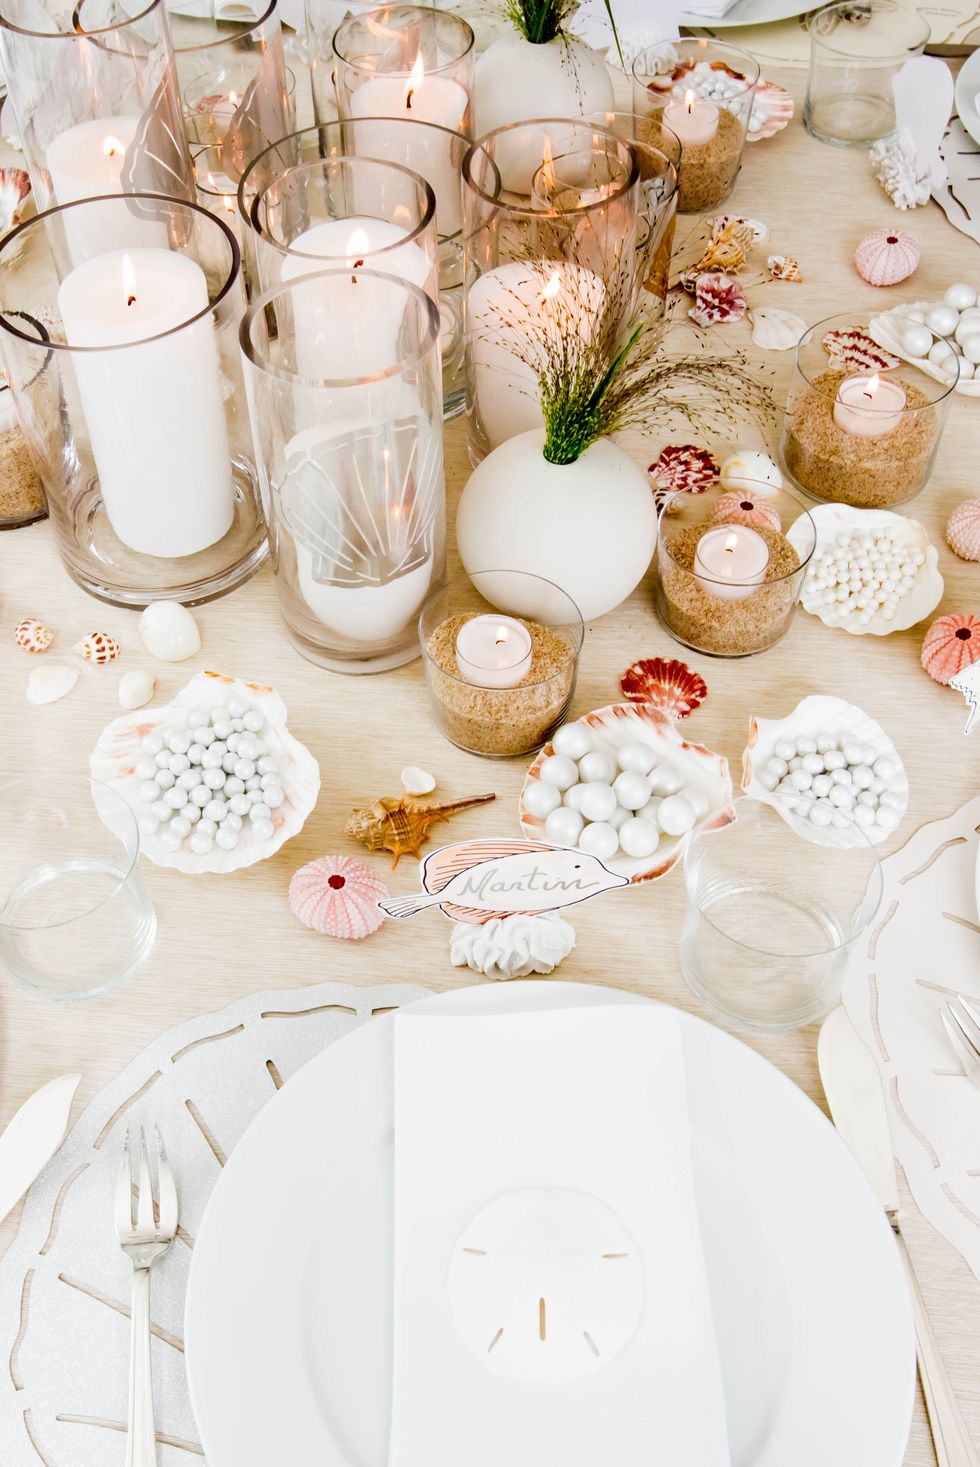 25 Gorgeous Summer Table Decorations - Summer Party Decorations